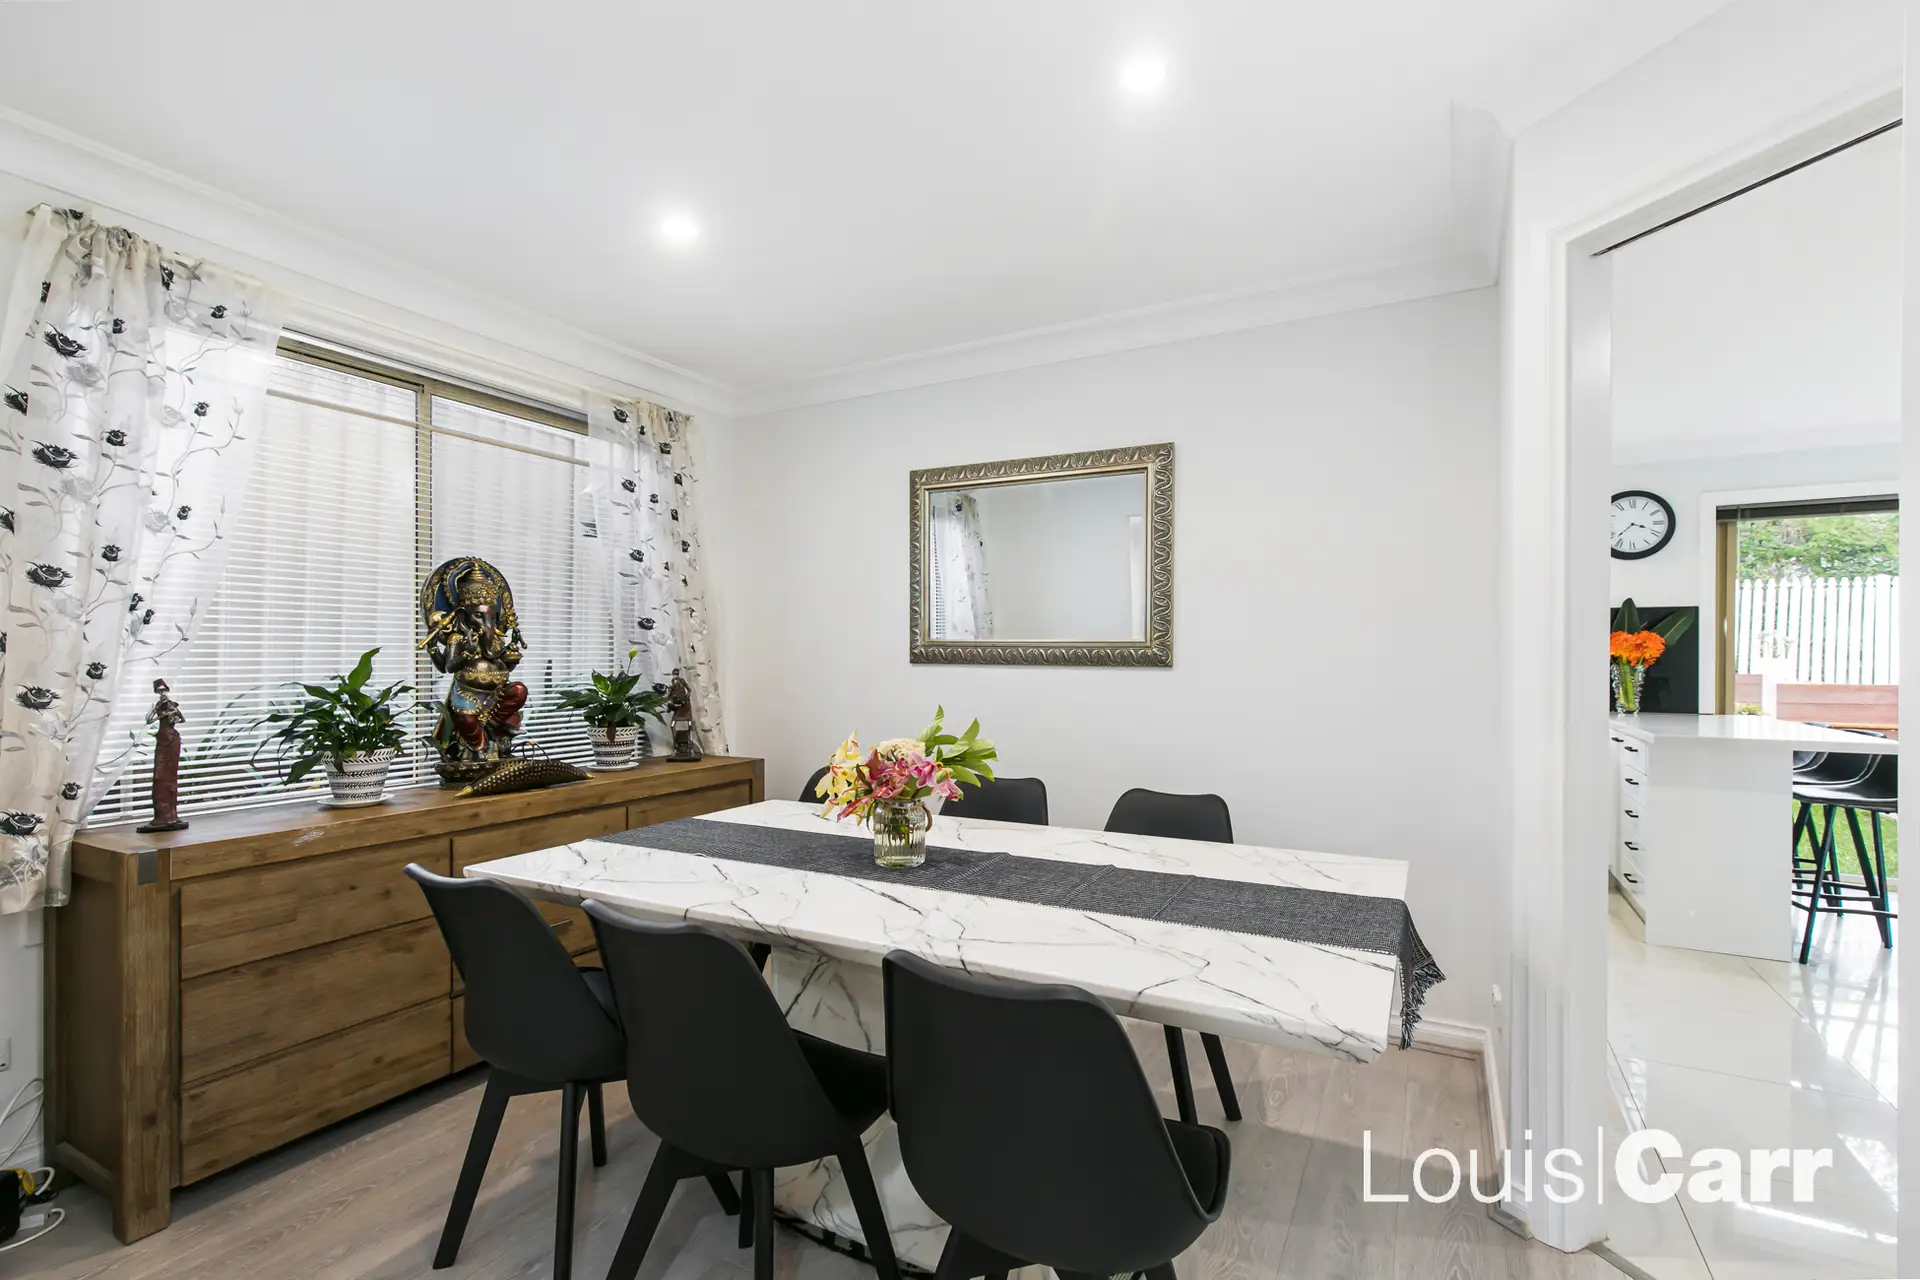 Photo #6: 4/64 Purchase Road, Cherrybrook - Sold by Louis Carr Real Estate